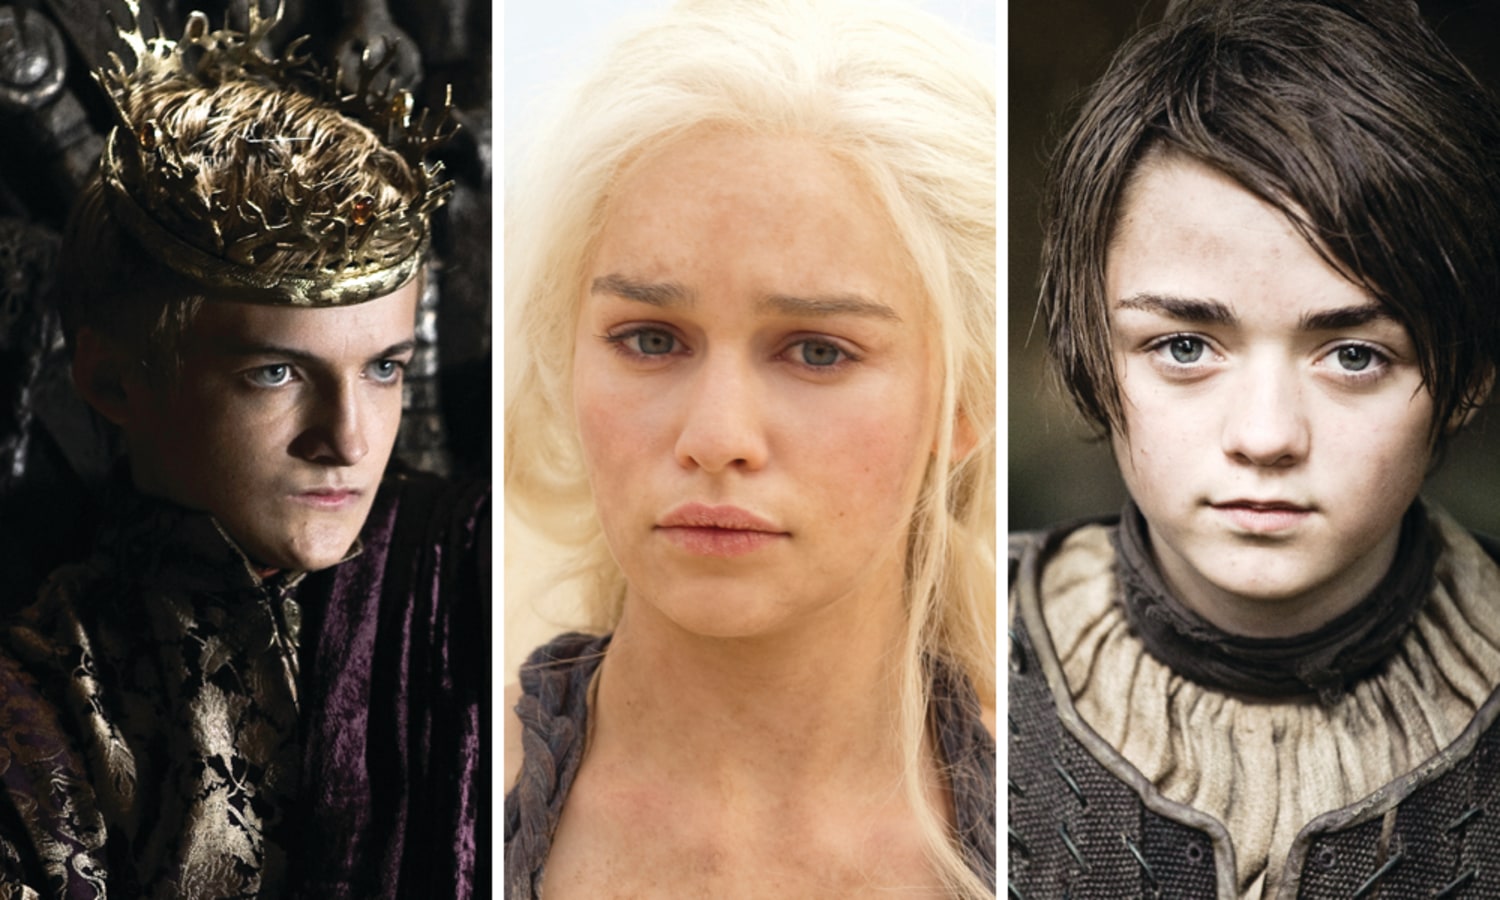 Game of Thrones' cast: How HBO's smash hit changed our lives